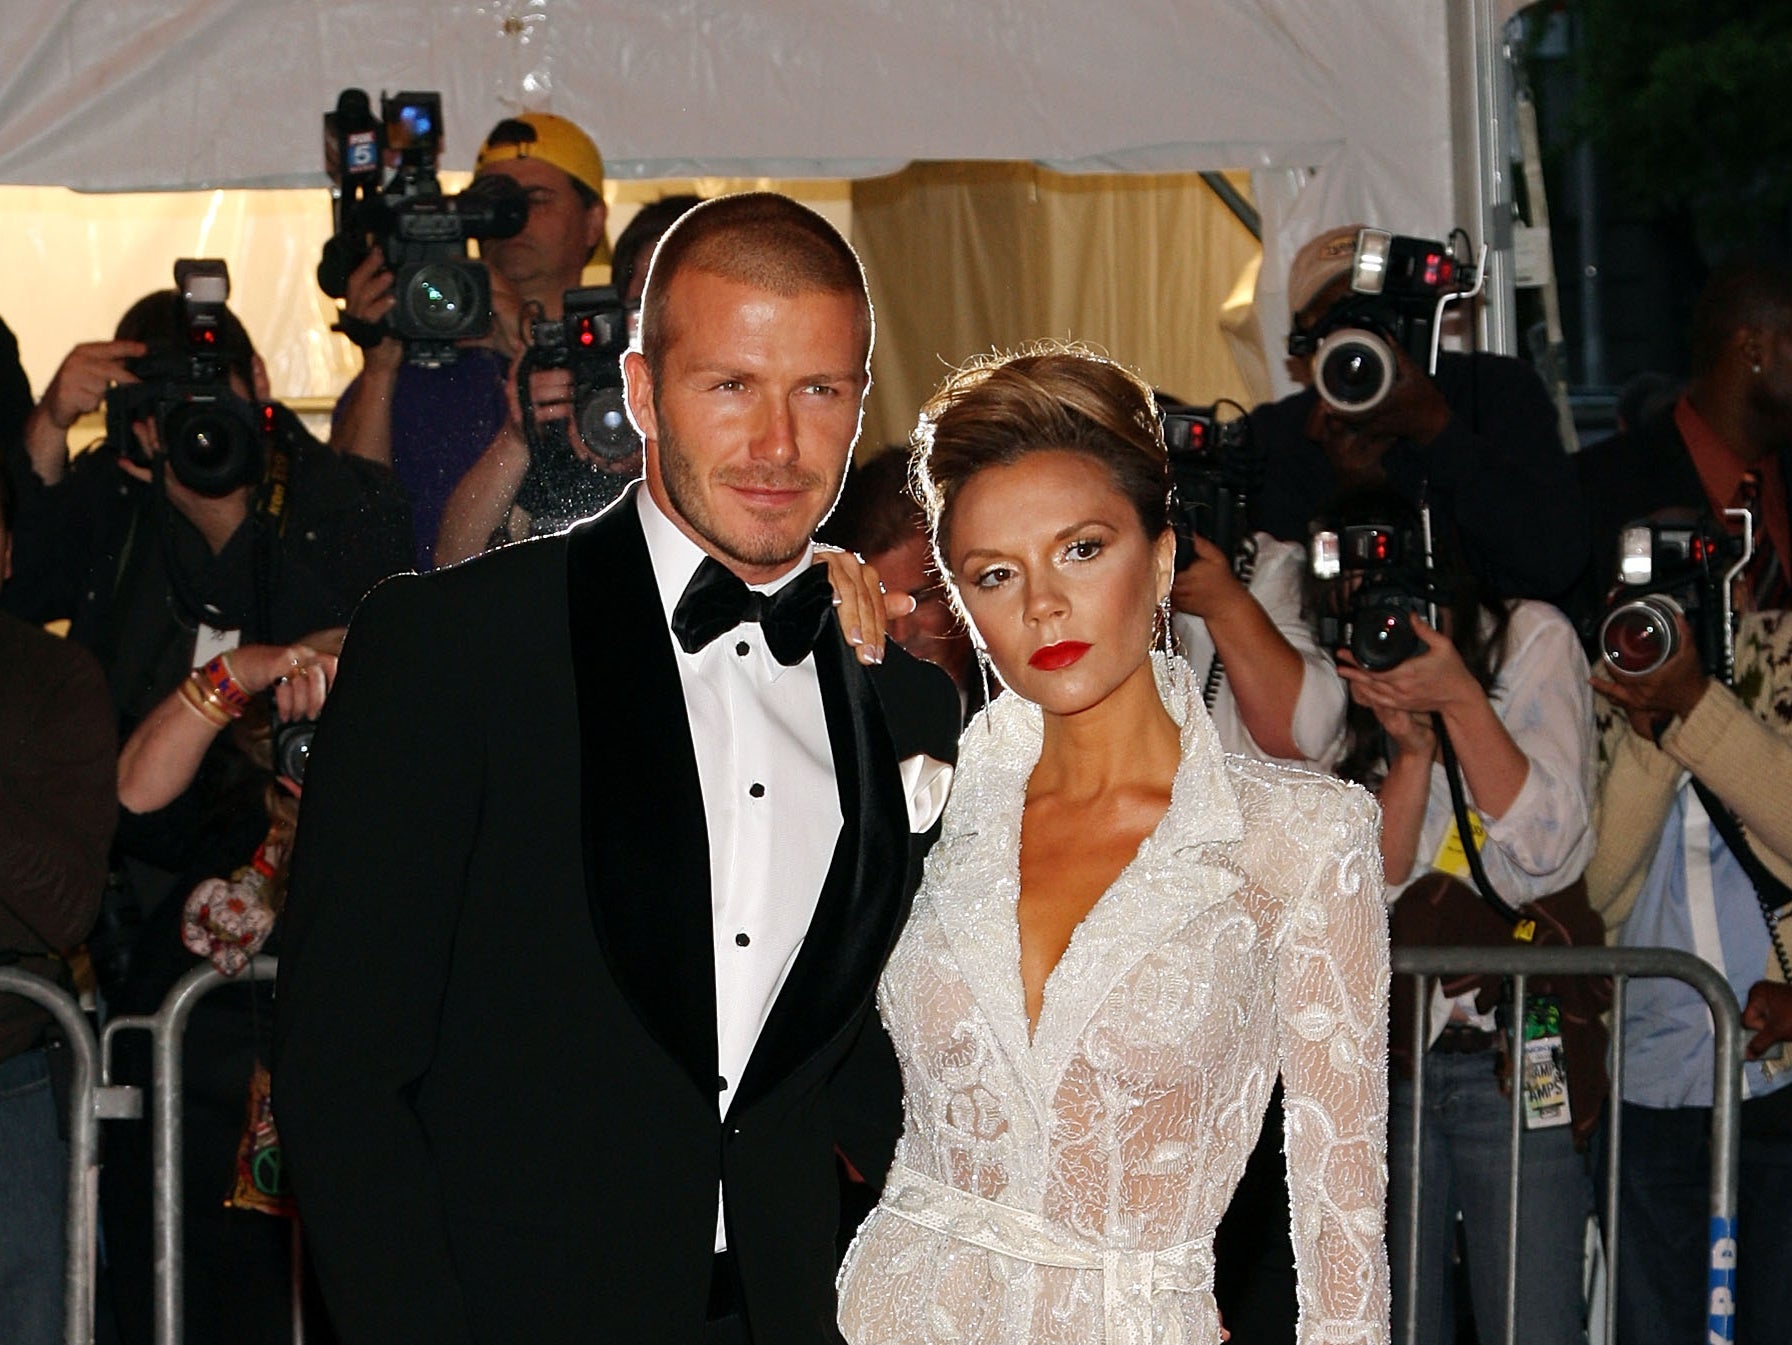 Victoria and David Beckham at the Met Gala in 2008